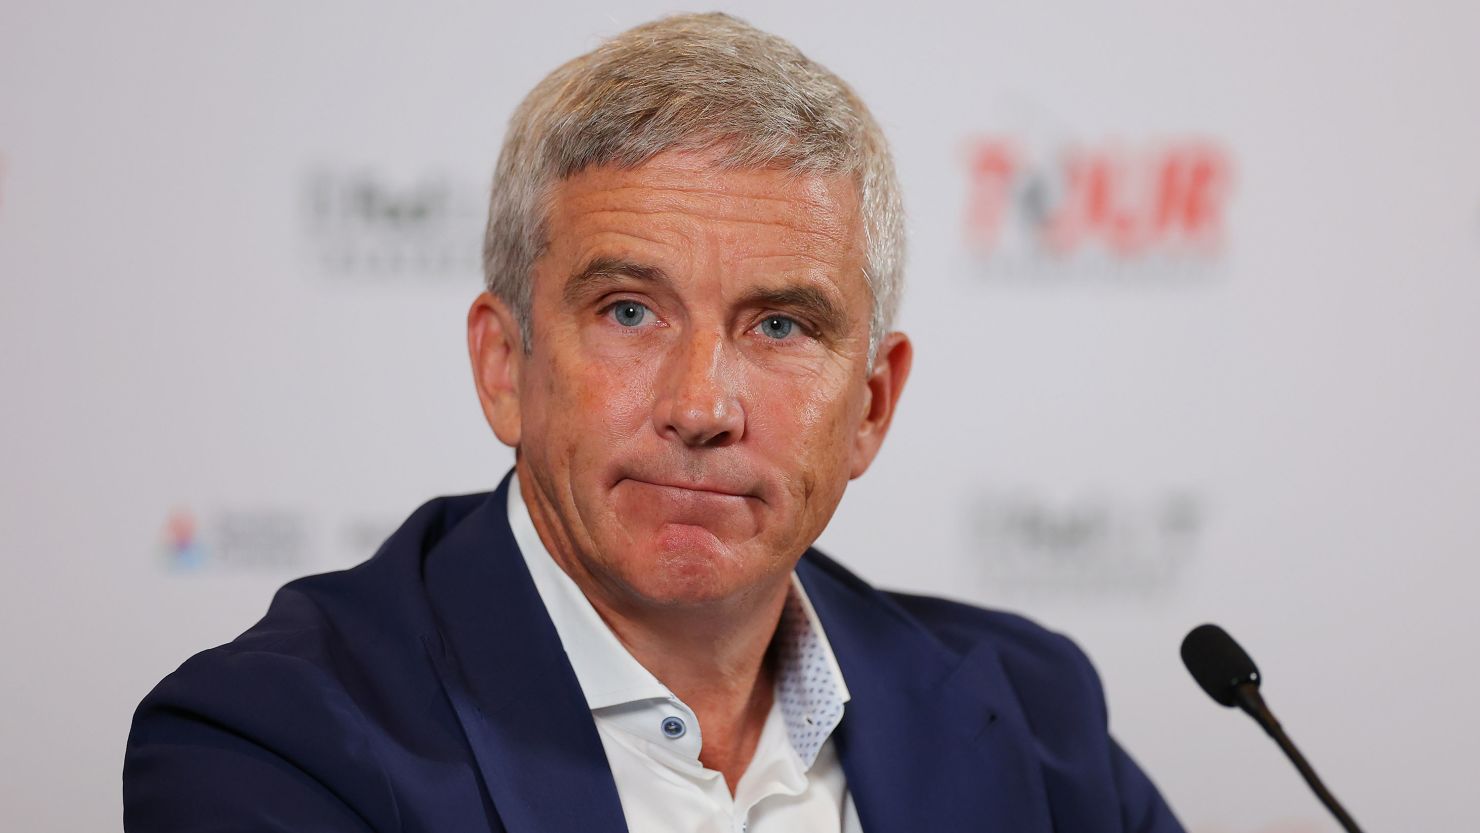 PGA Tour commissioner Jay Monahan is facing scrutiny.